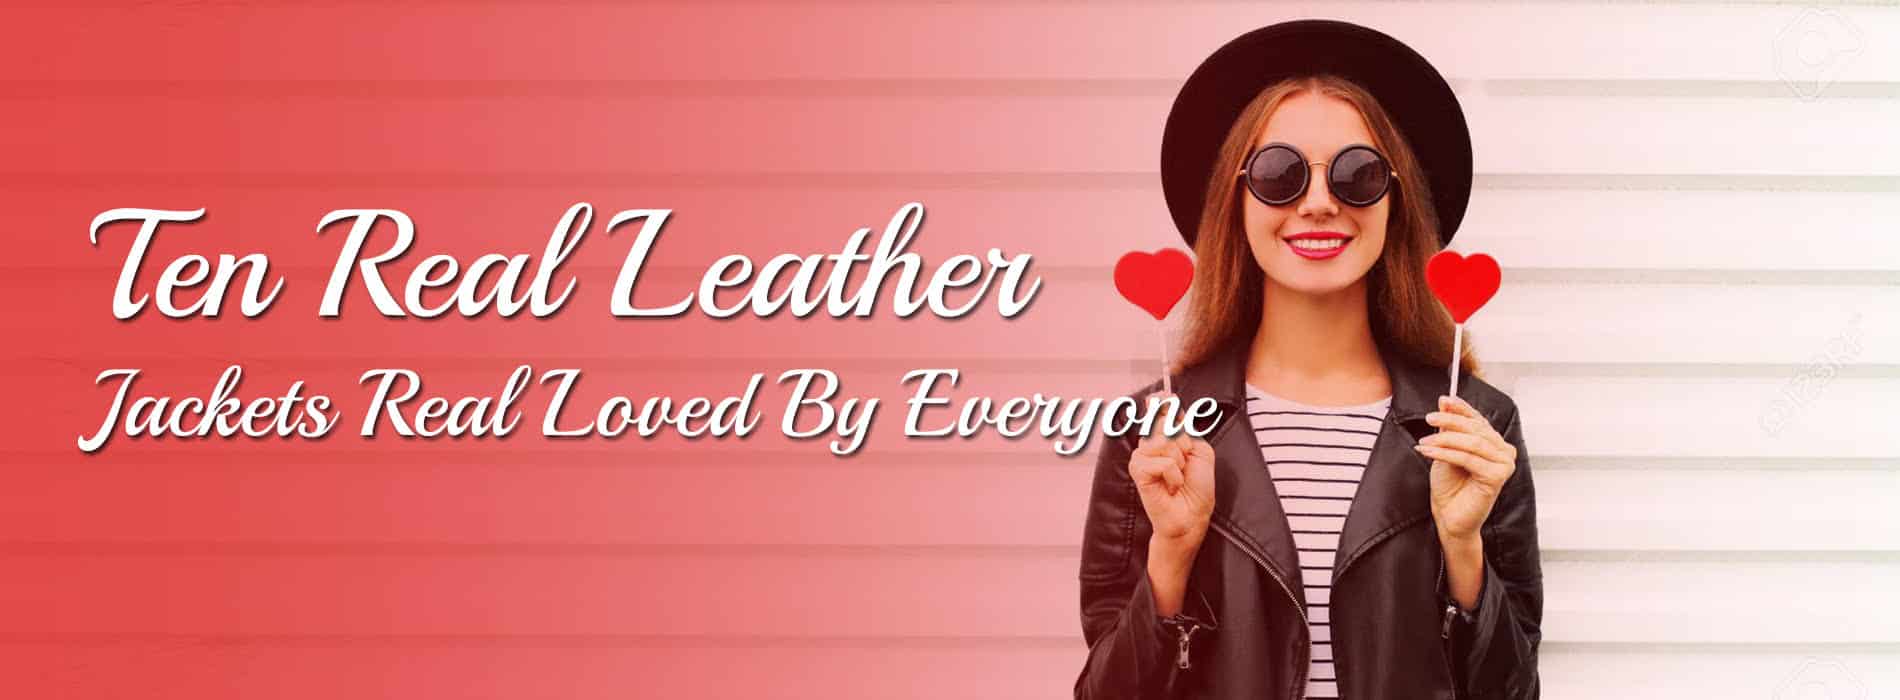 Ten real leather jackets